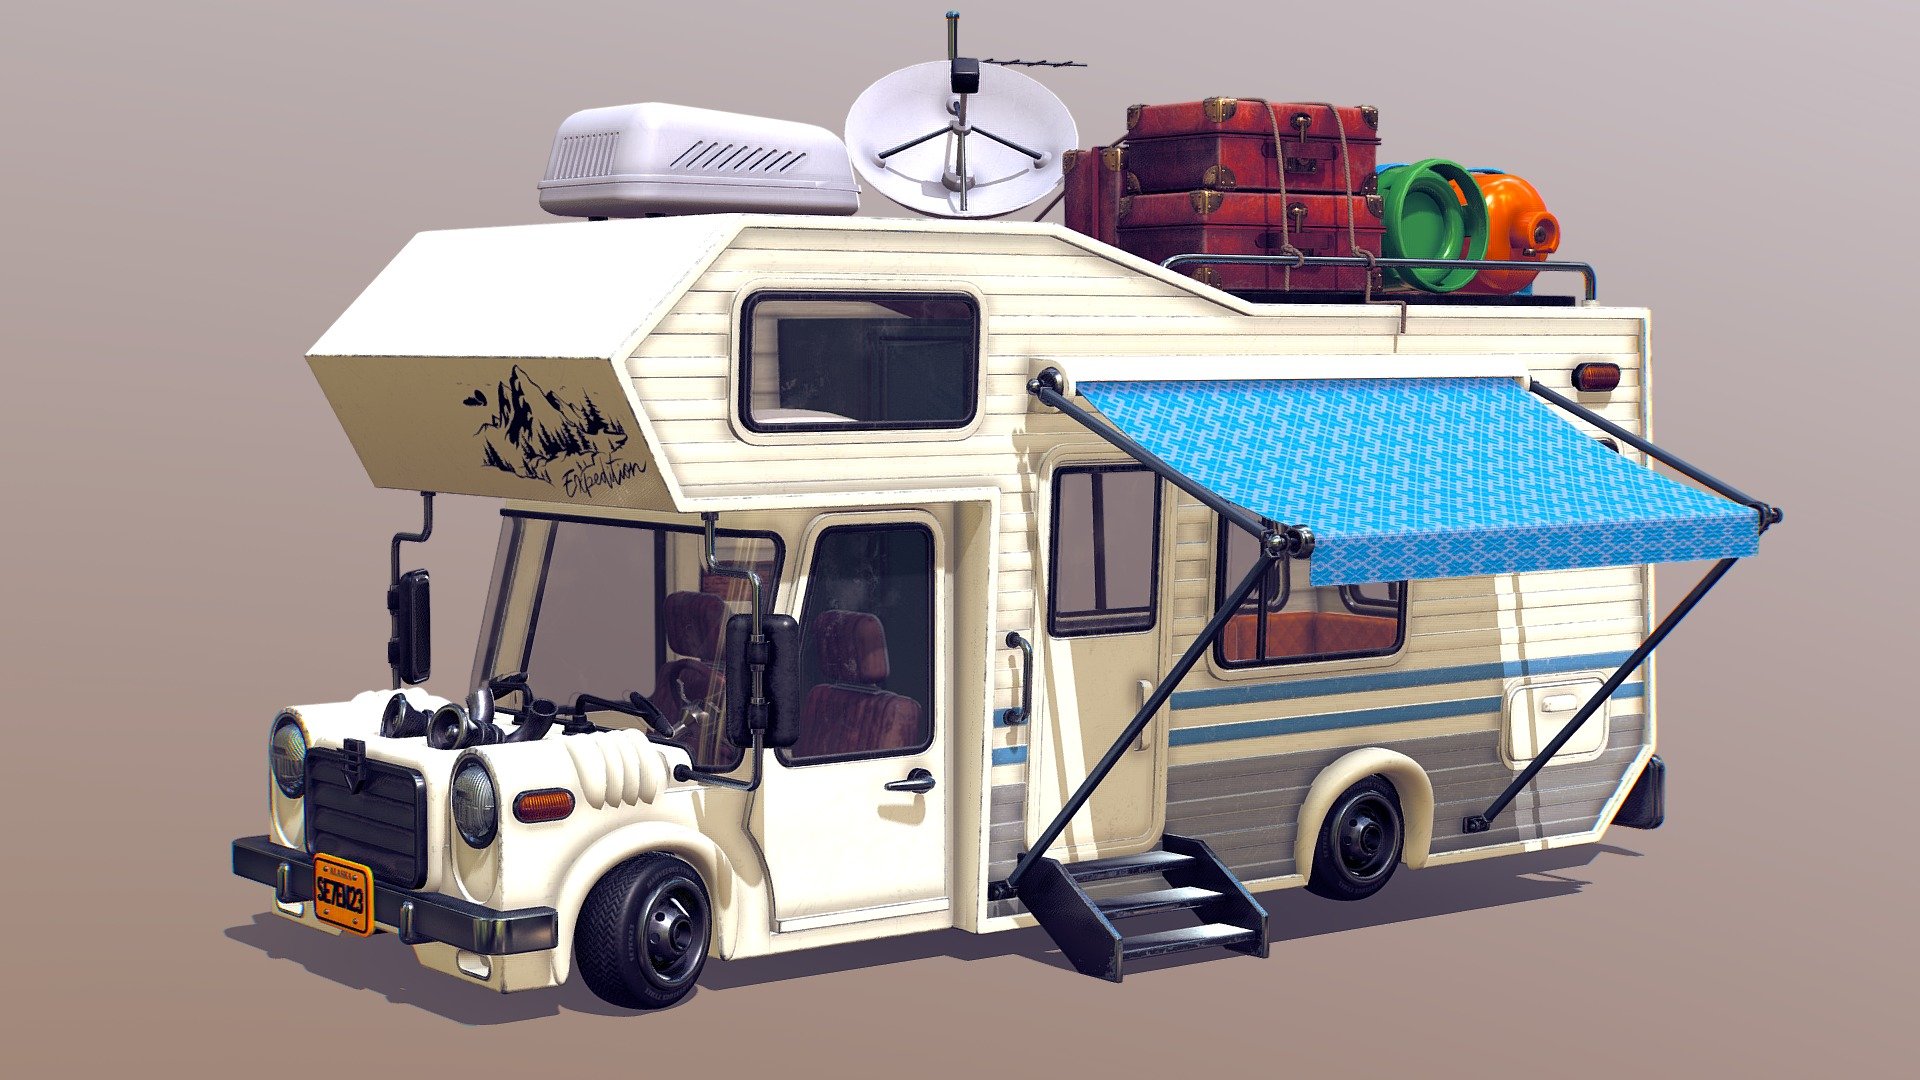 This was a stylised camper van I modelled for a collaboration with Marvelous Media Engine called Don't Not Die, an animated short we made entirely in Blender.

It was modelled in Blender and textured in Substance Painter.

If you purchase this model then please send me a message to tell me about your project, I’d love to see what you create with it! - Stylised Camper Van - Buy Royalty Free 3D model by se7en23 3d model